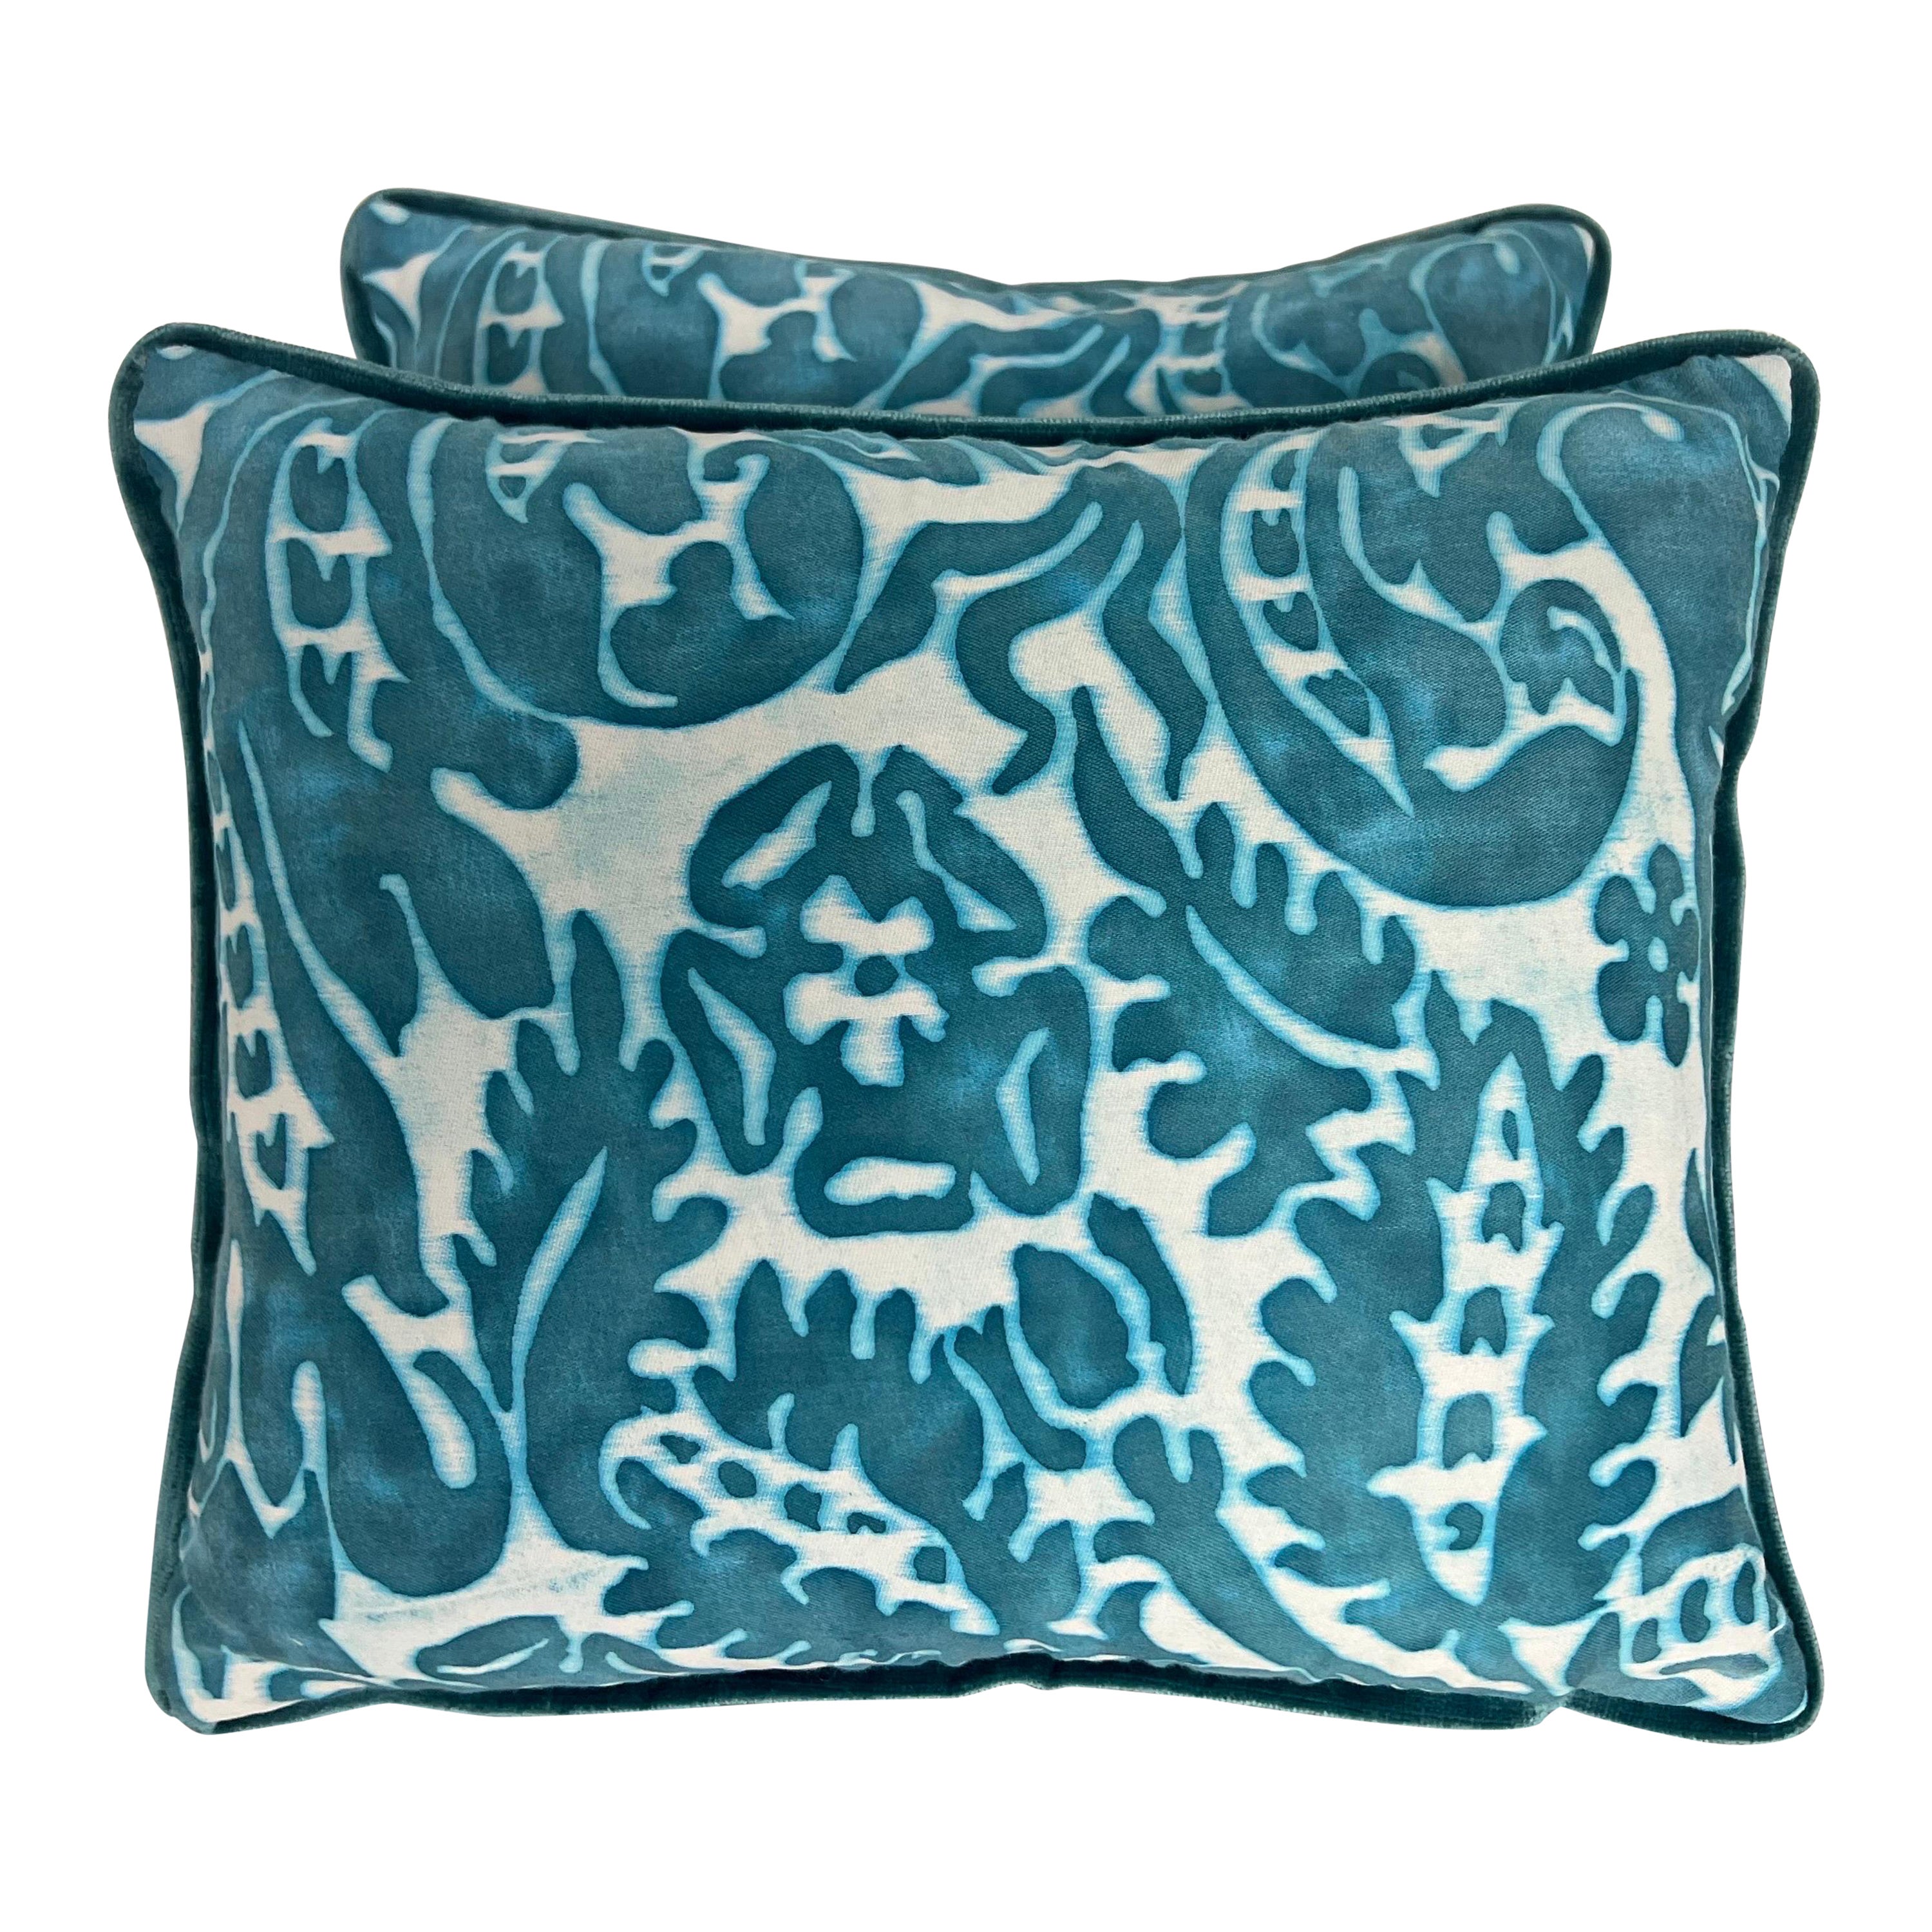 Pair of Teal and White Colored Fortuny Style Pillows For Sale